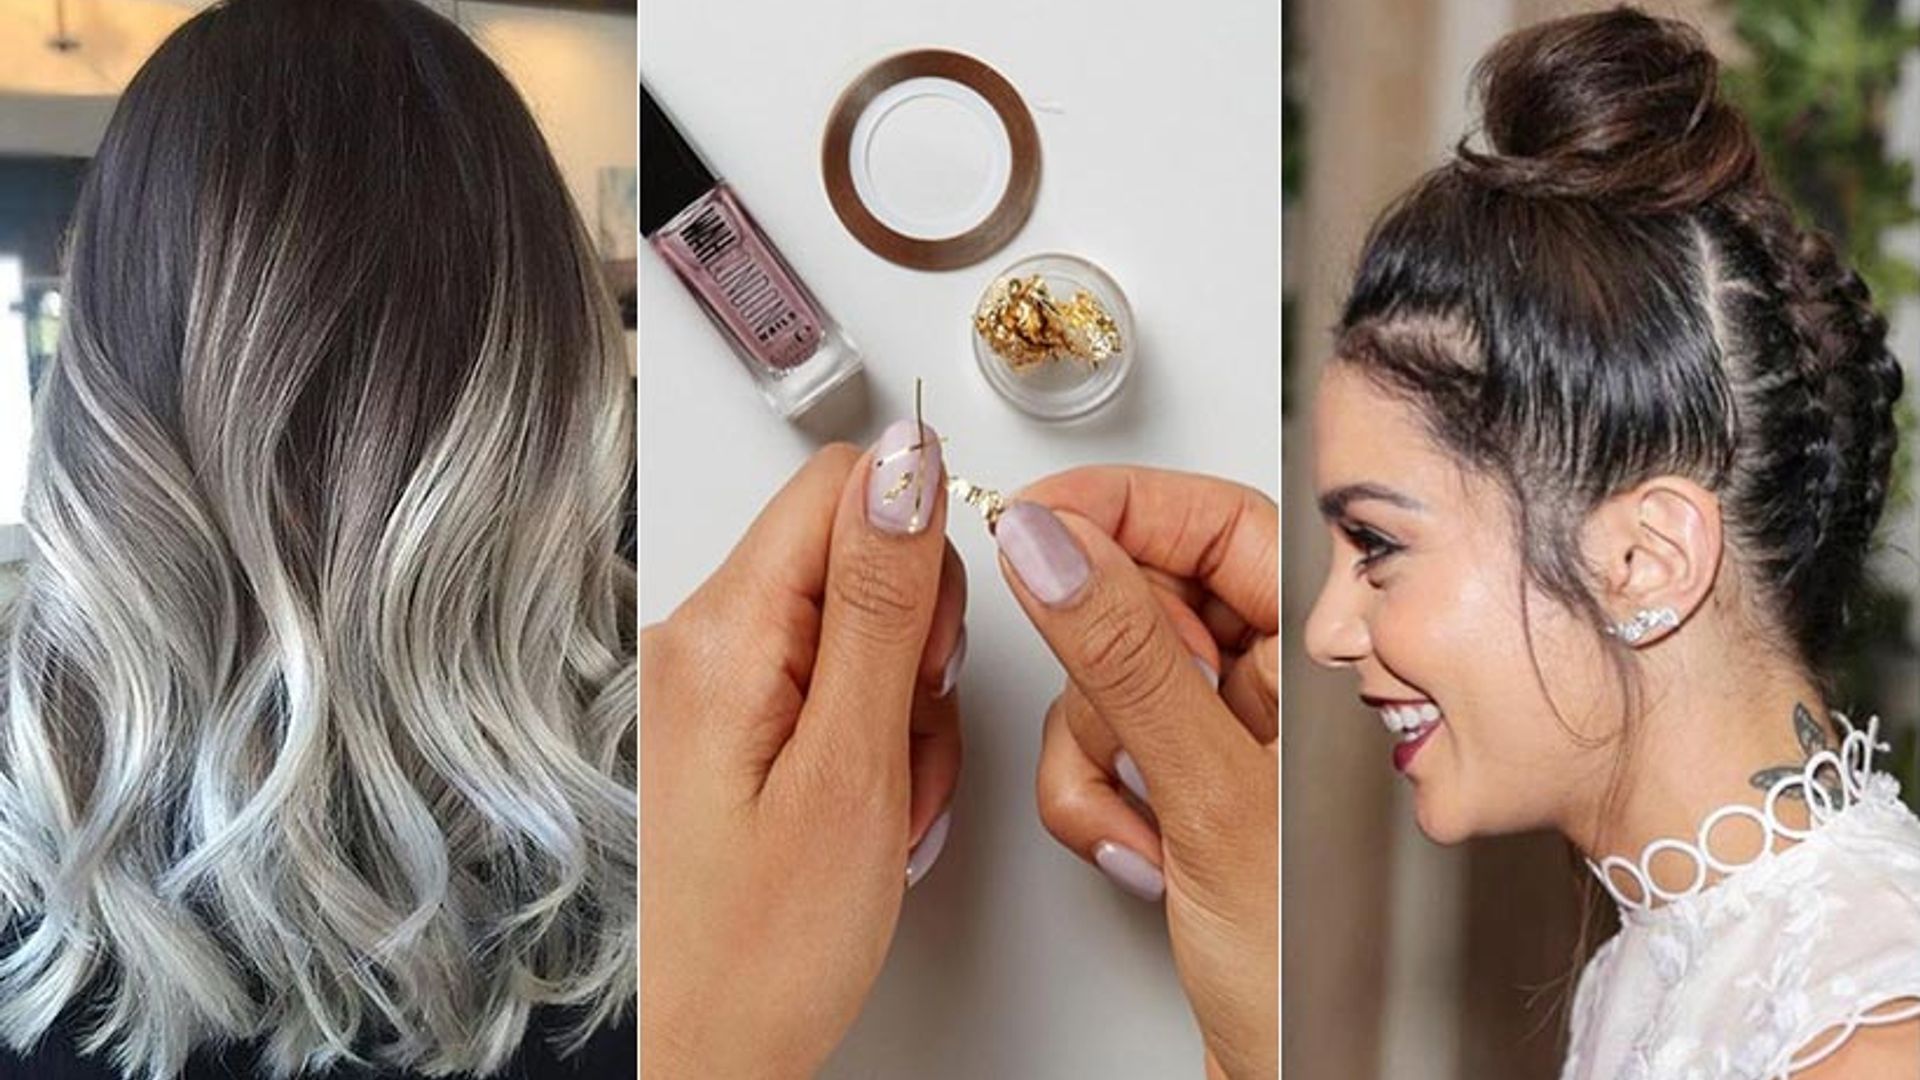 Pinterest predicts the biggest beauty trends for 2017